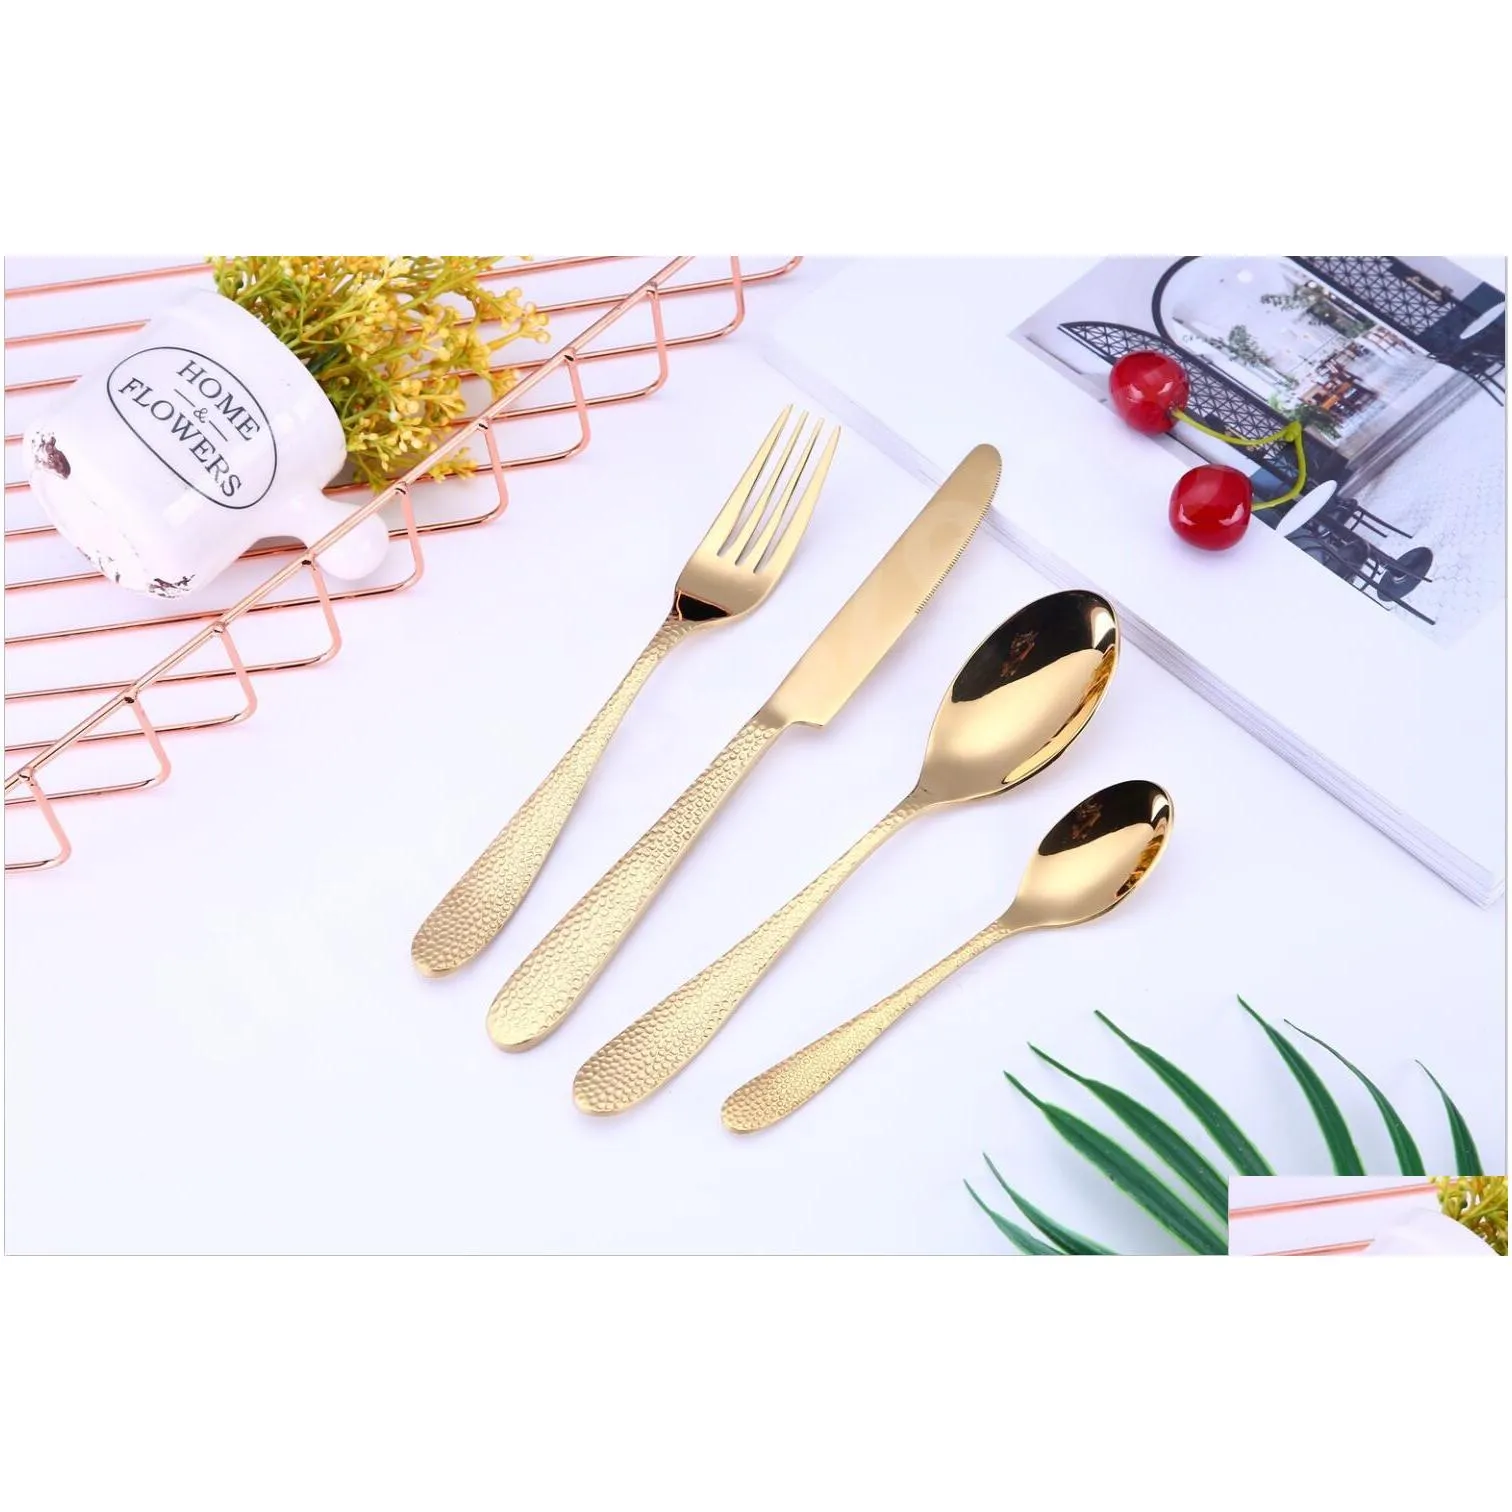 5 colors highgrade gold cutlery flatware set spoon fork knife teaspoon stainless dinnerware sets kitchen tableware set 10 choices